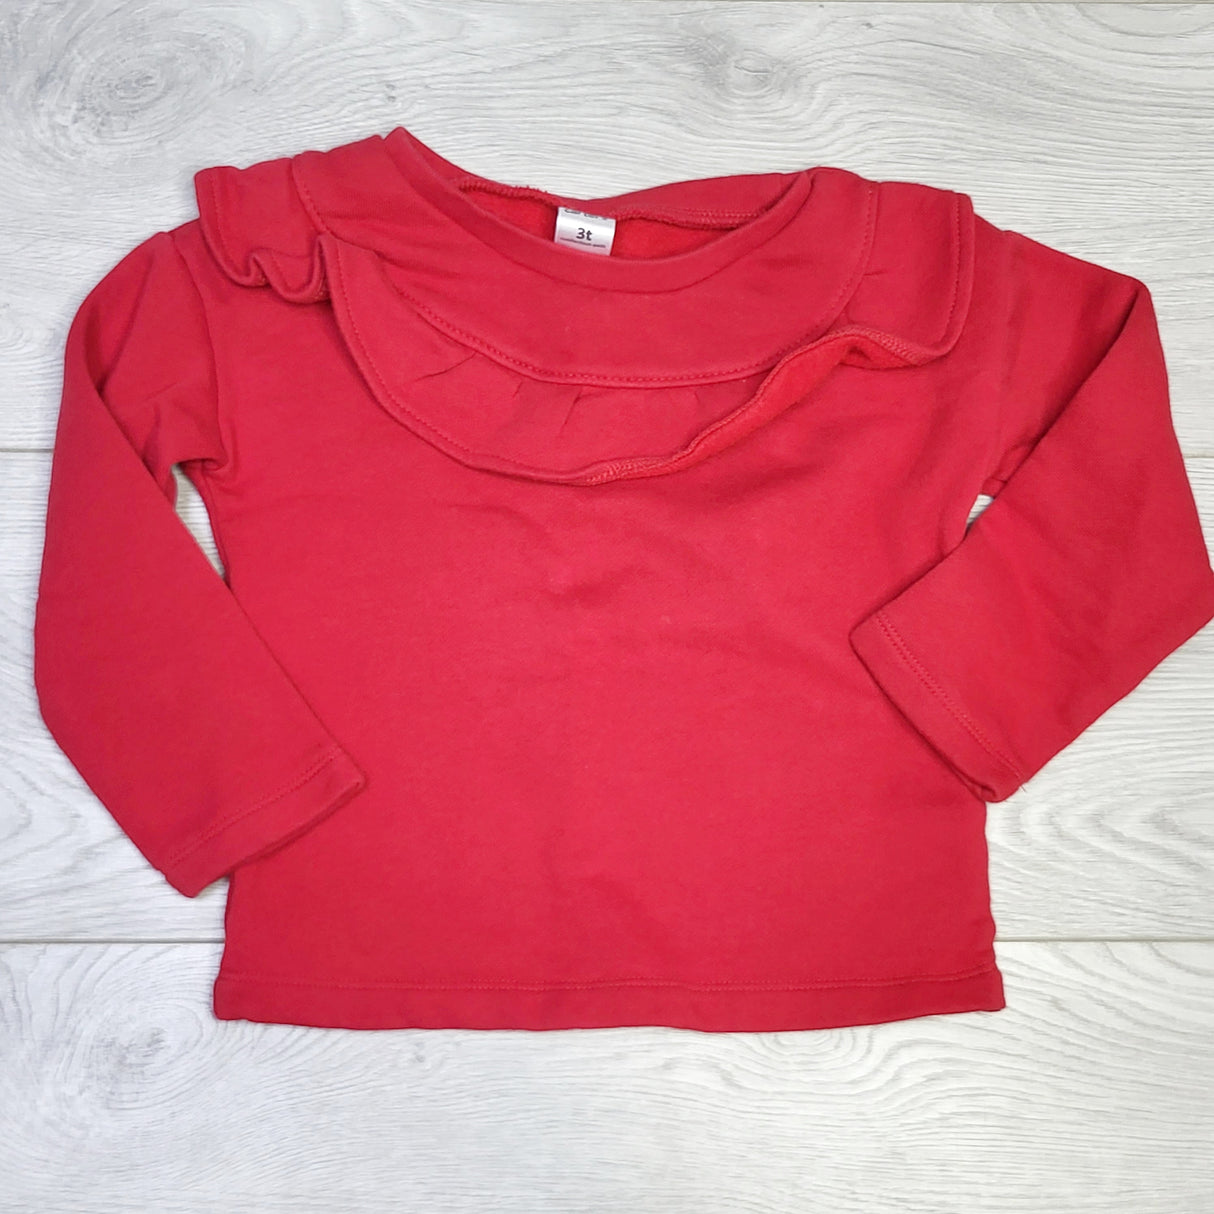 CRTH1 - Carters red sweatshirt with ruffle. Size 3T